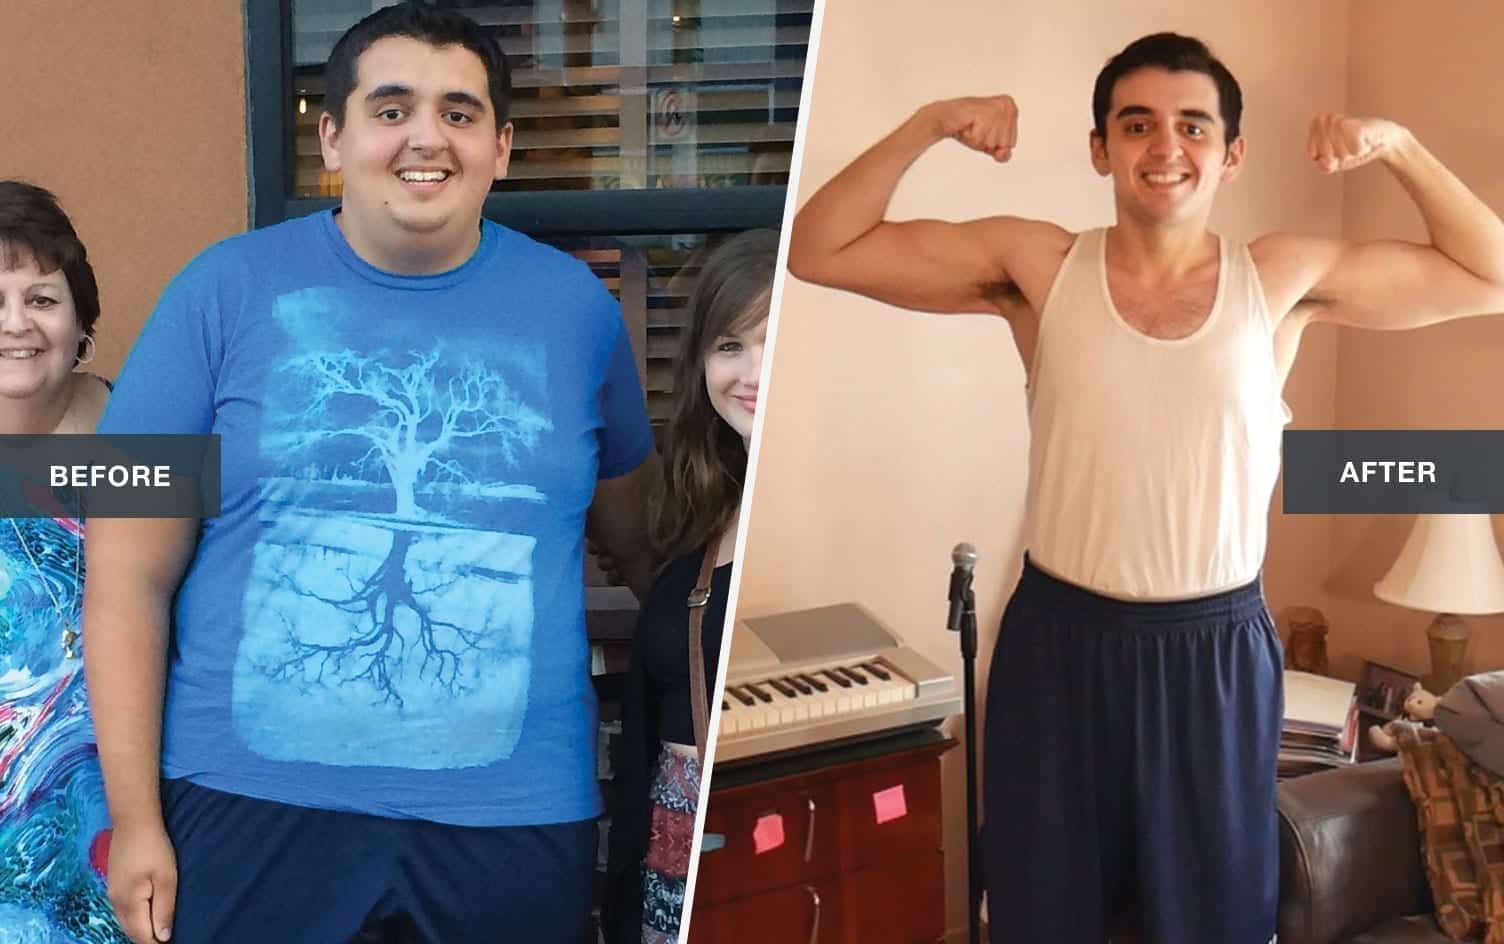 Sean Lost 130 Pounds After a Lifetime of Bully and Weight Bias